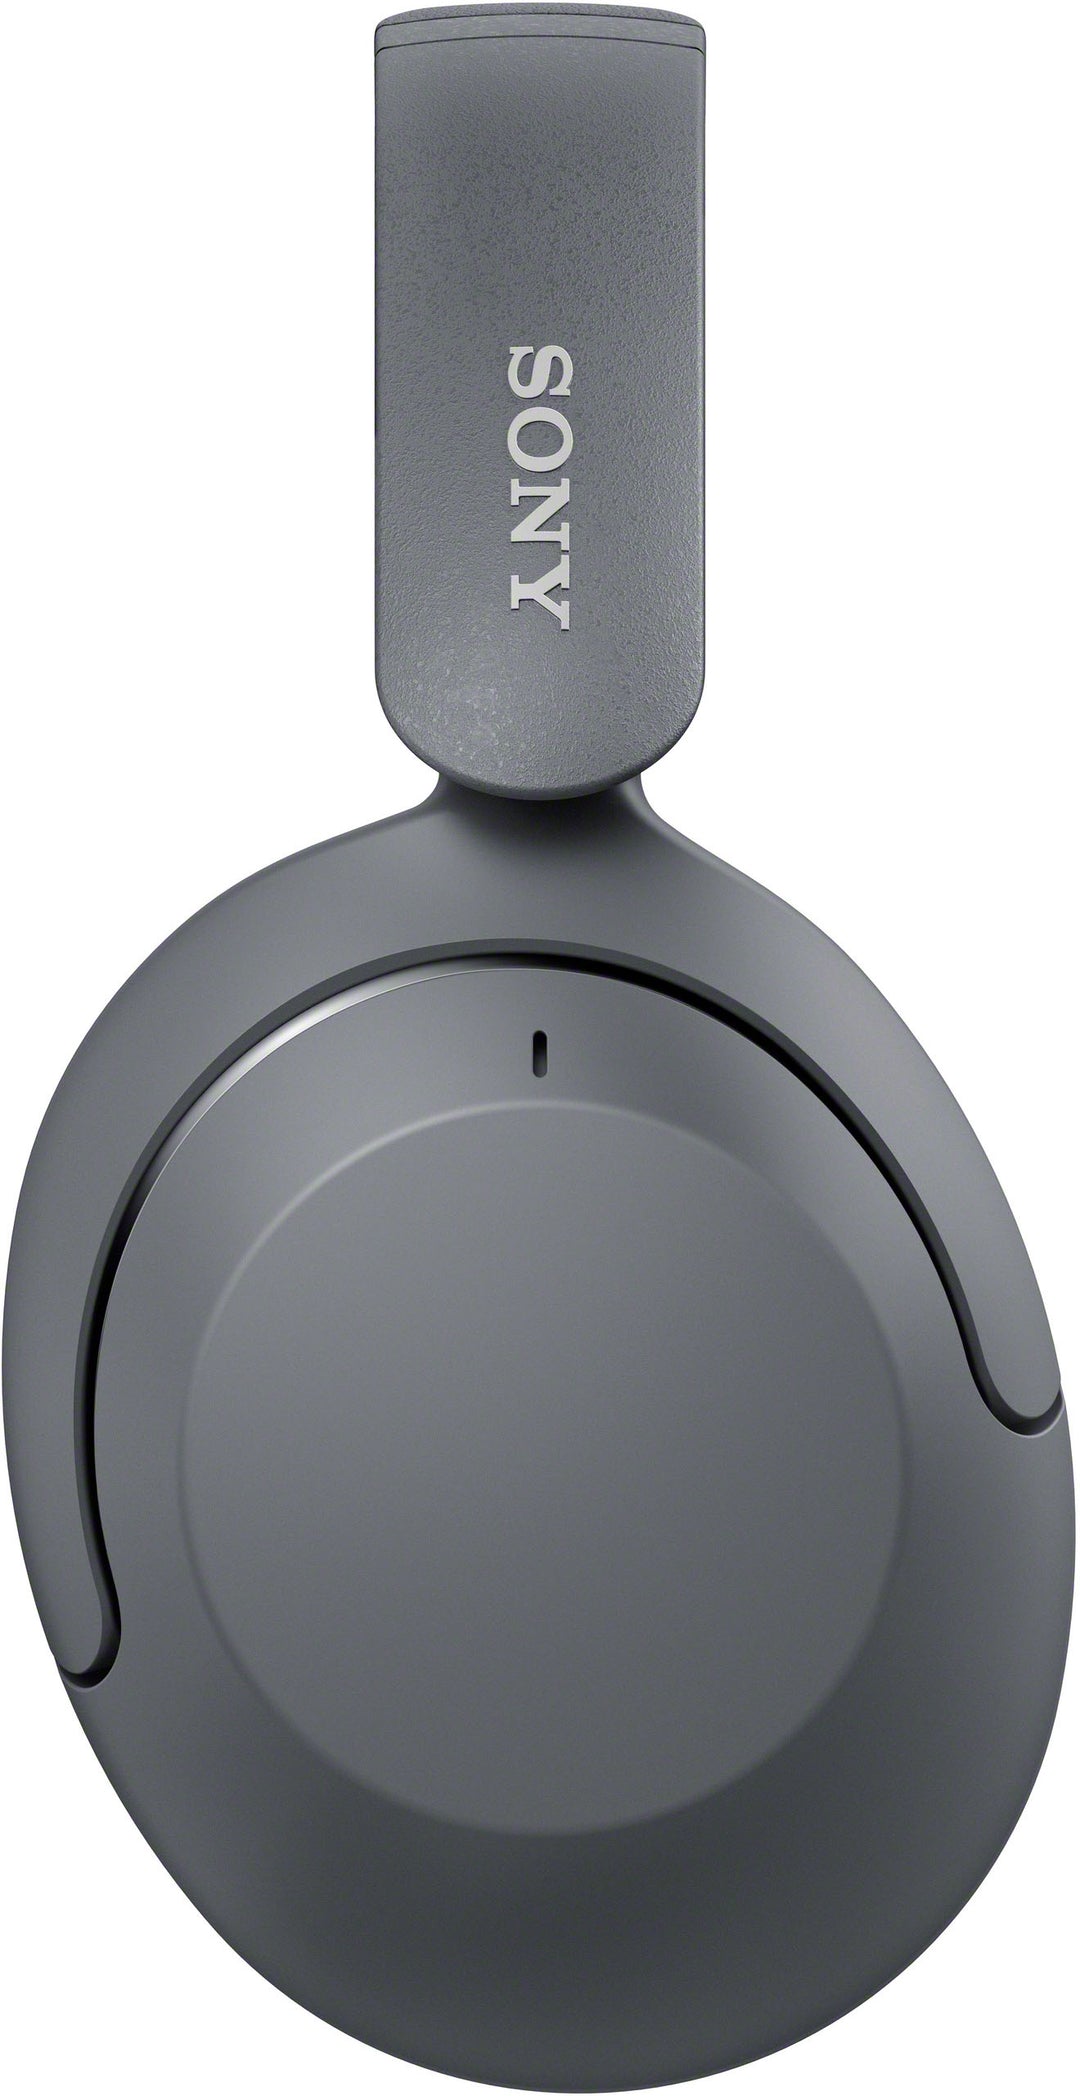 Sony - WH-XB910N Wireless Noise Cancelling Over-The-Ear Headphones - Gray_2